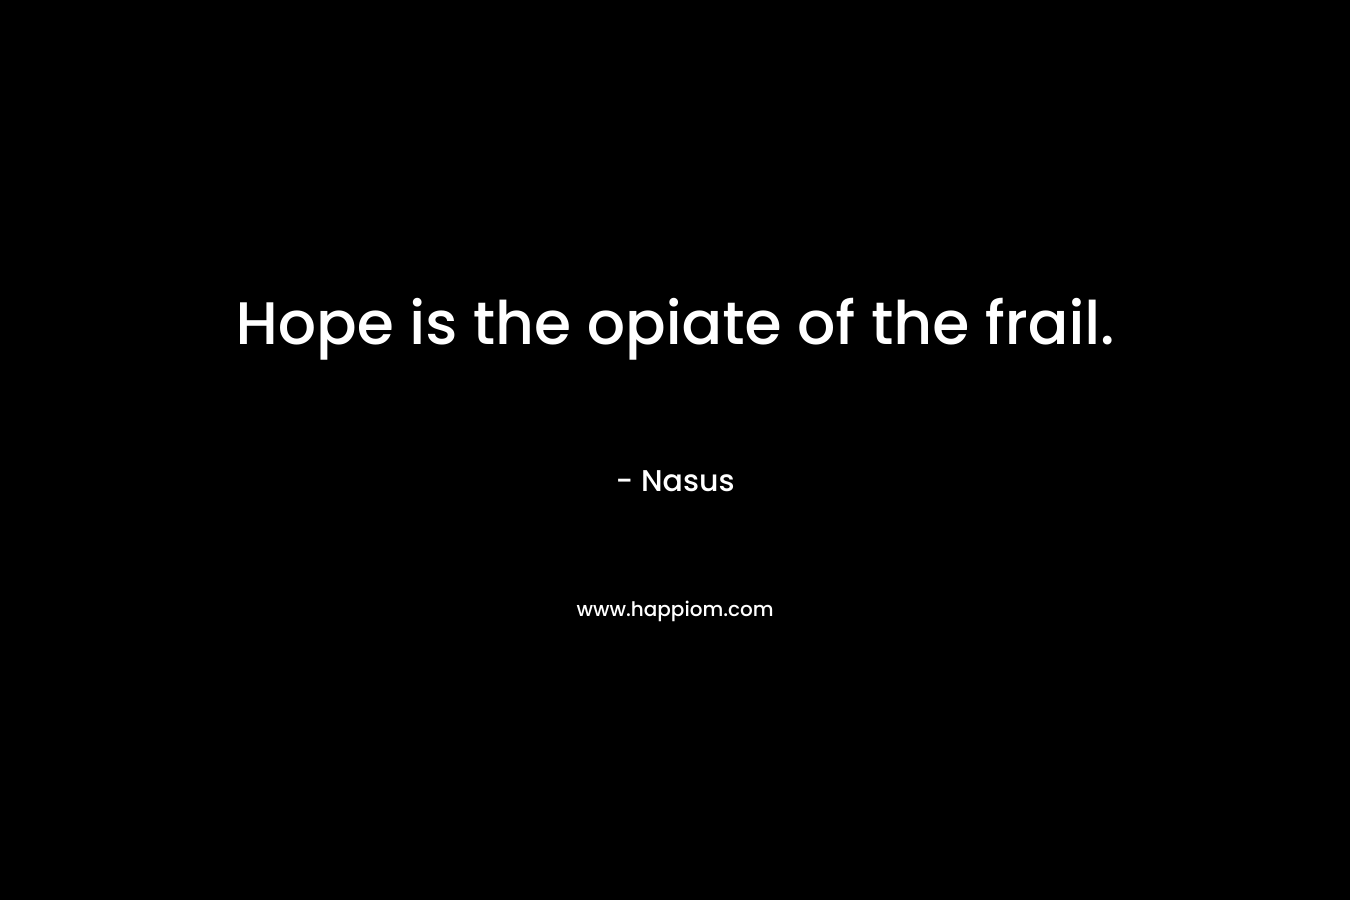 Hope is the opiate of the frail.